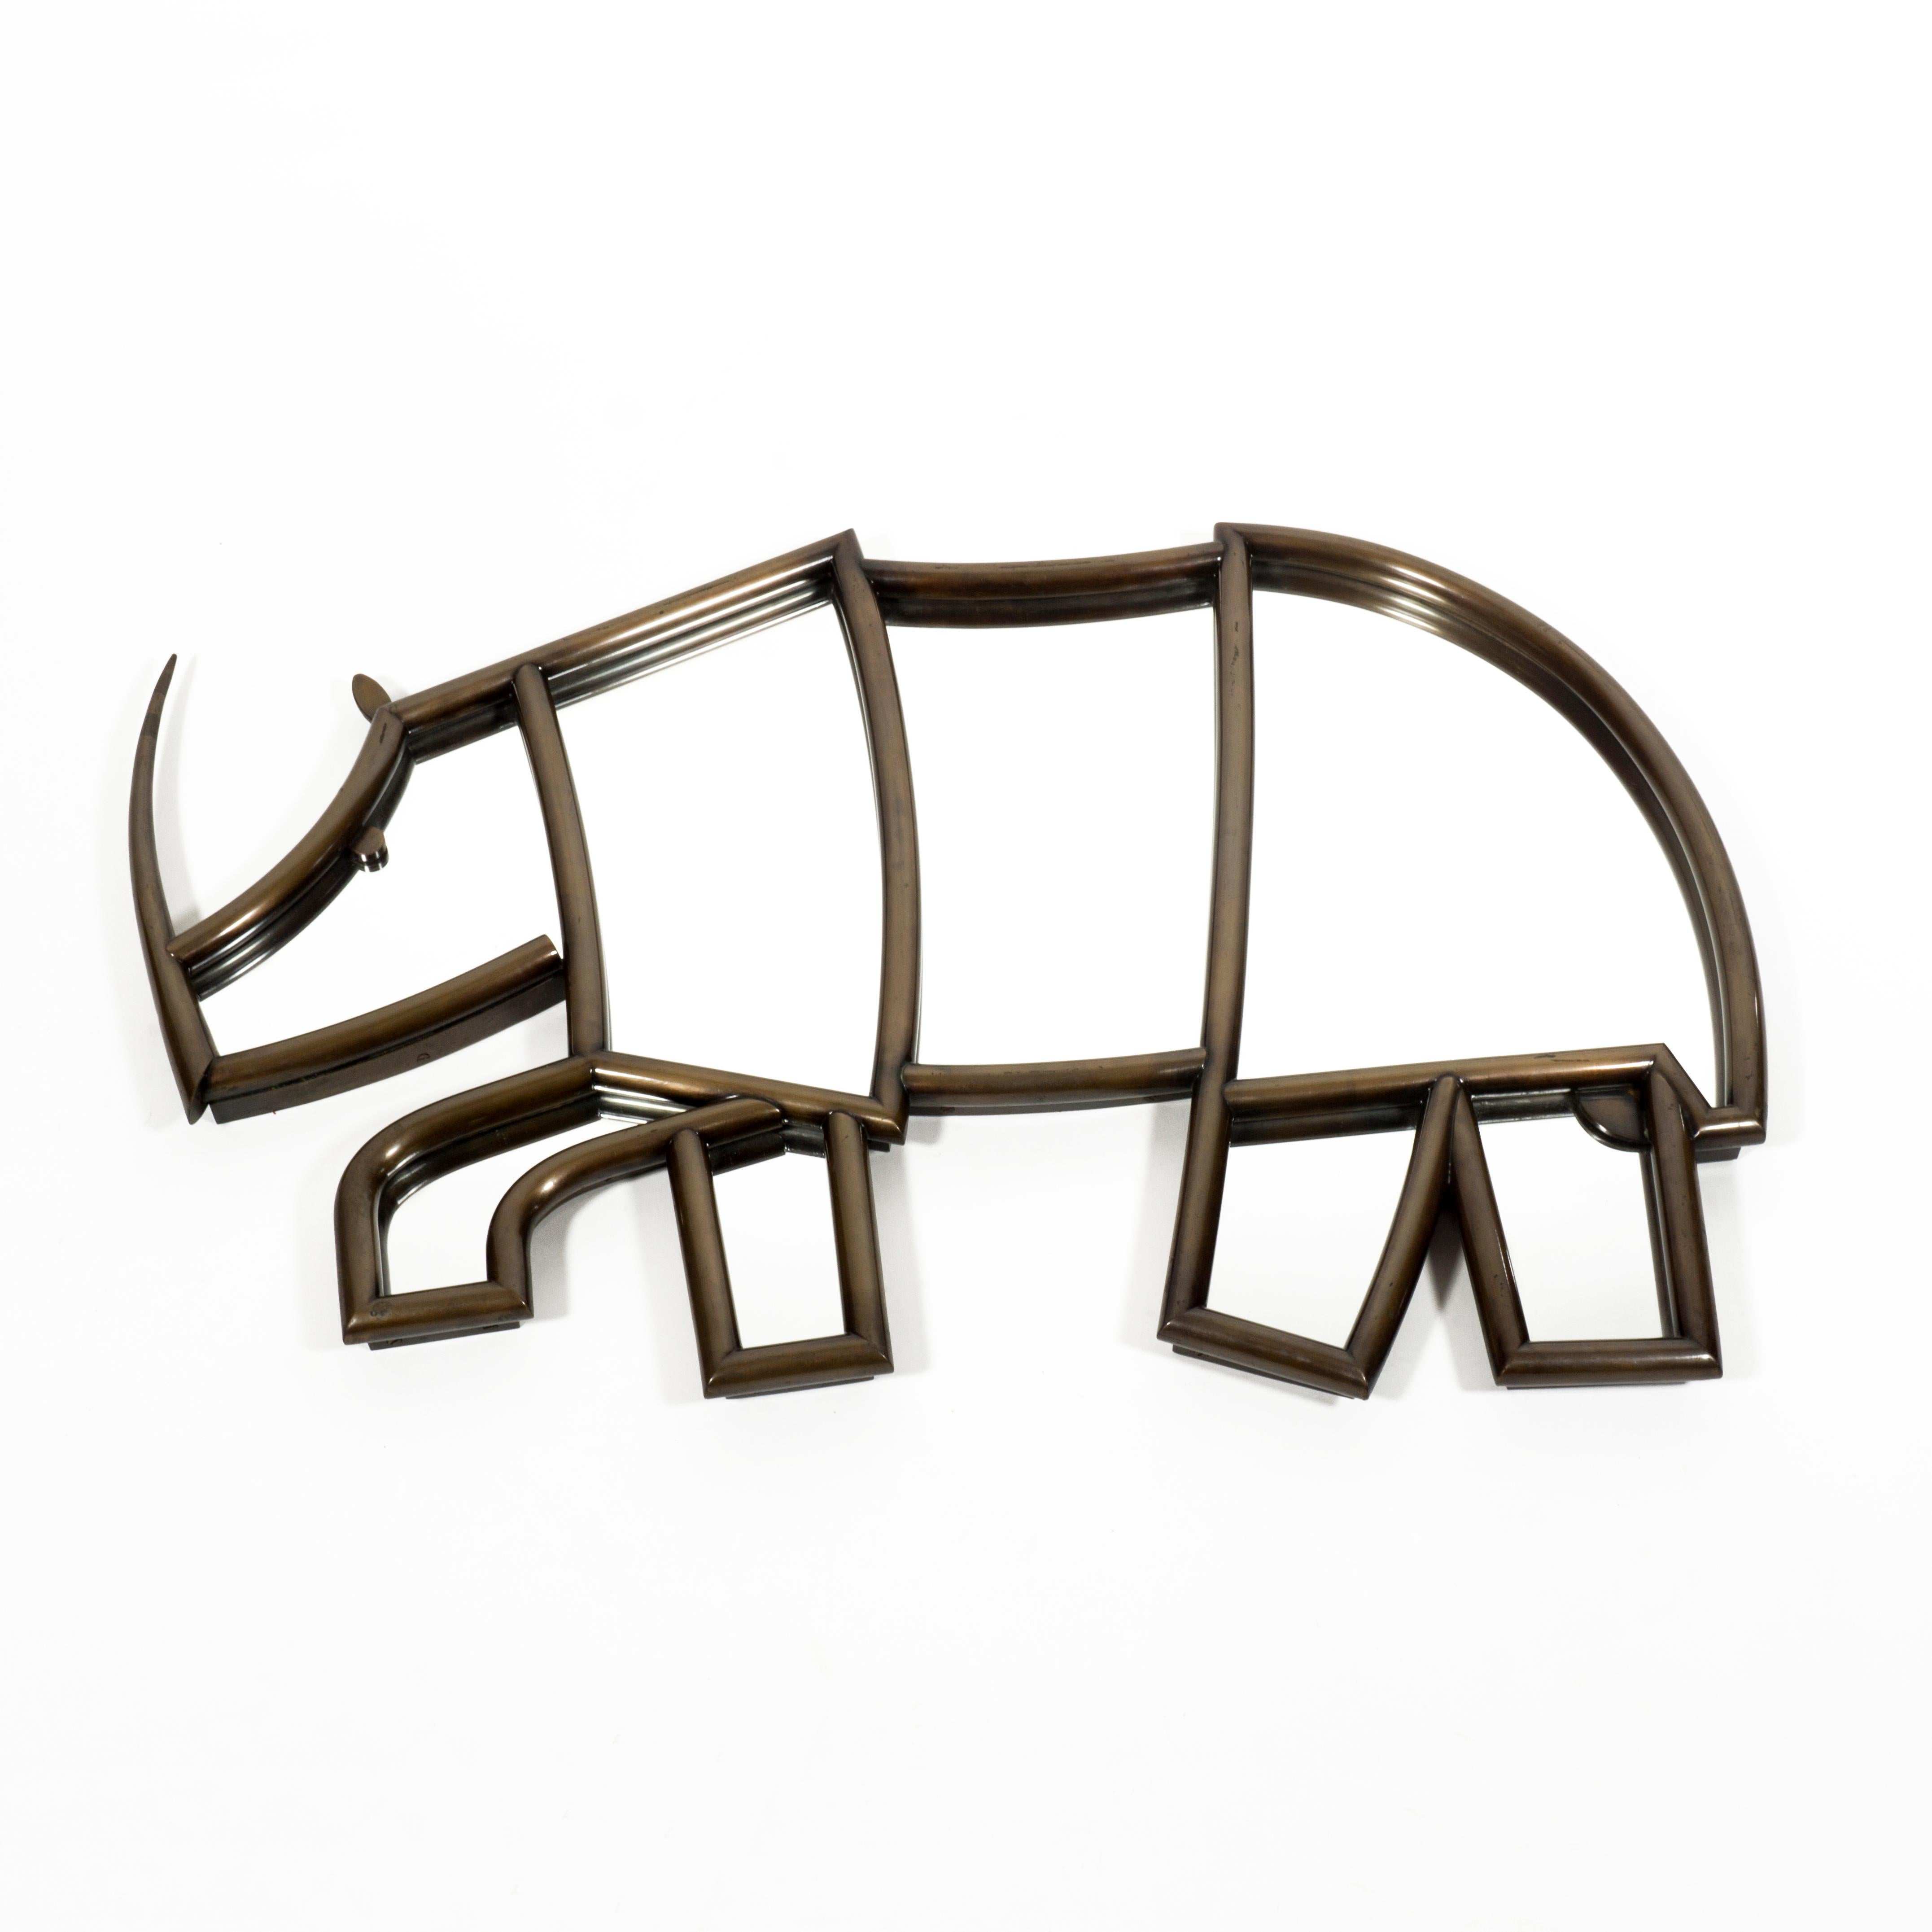 Highly decorative and very charming Italian Wall Mirror in shape of an Rhino from the 1950s.
The front part of the mirror has a beautiful frame made of bronze tubing and is very well crafted. Very special in particular is the beautitully tapered